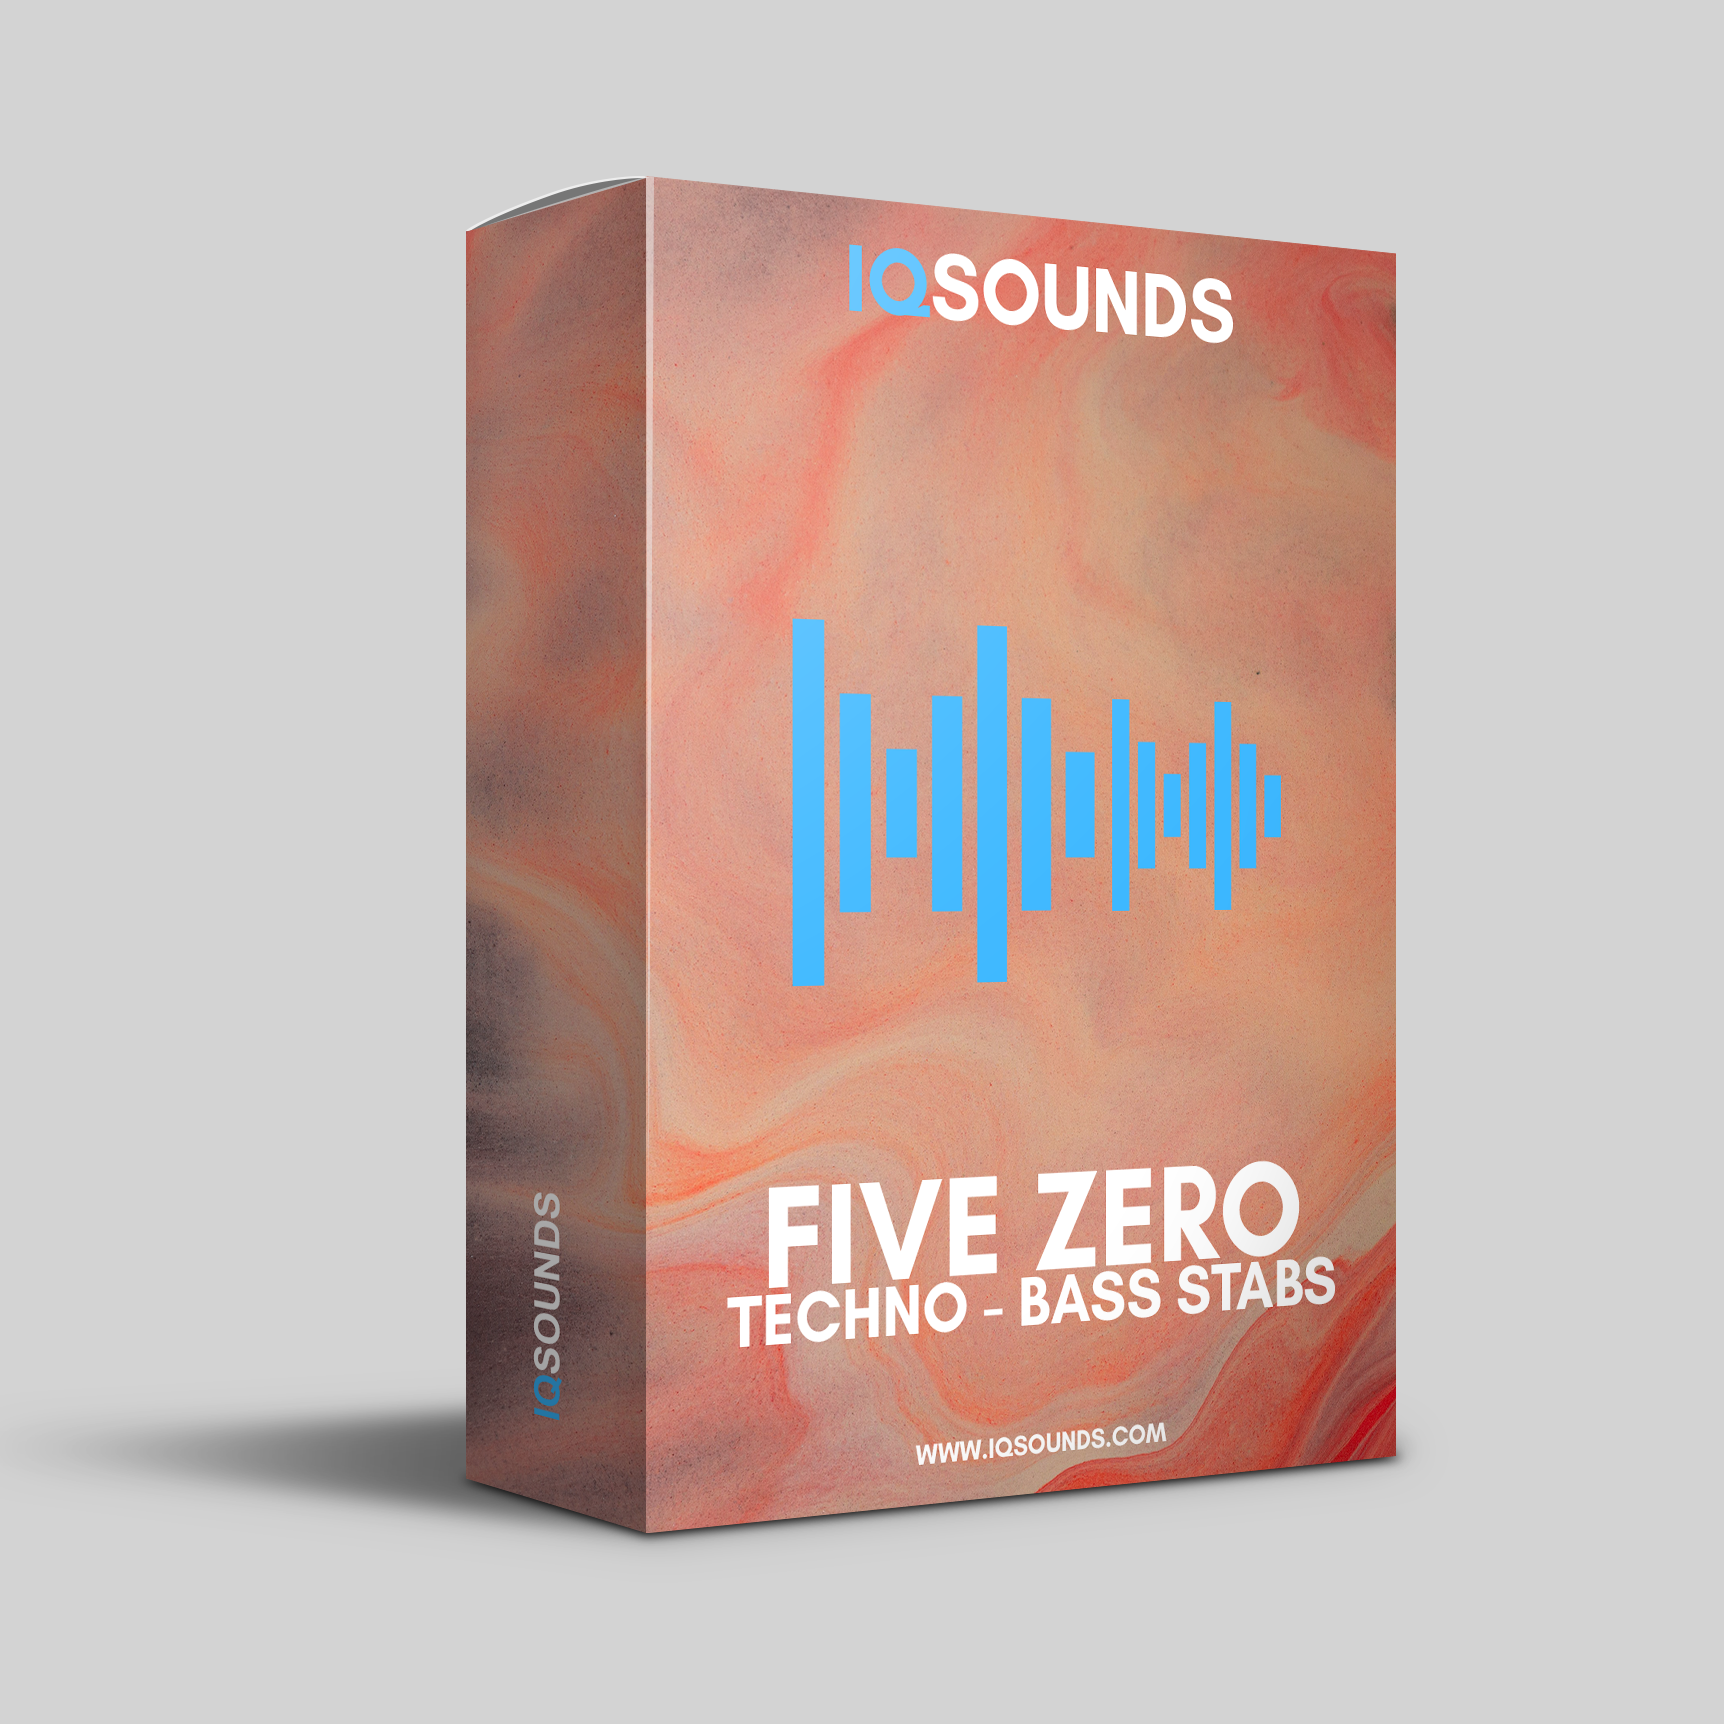 iqsounds, five zero techno, techno stabs, bass stabs, royalty free samples, techno bundle, free techno sounds, techno sounds, download techno packs, techno sample pack